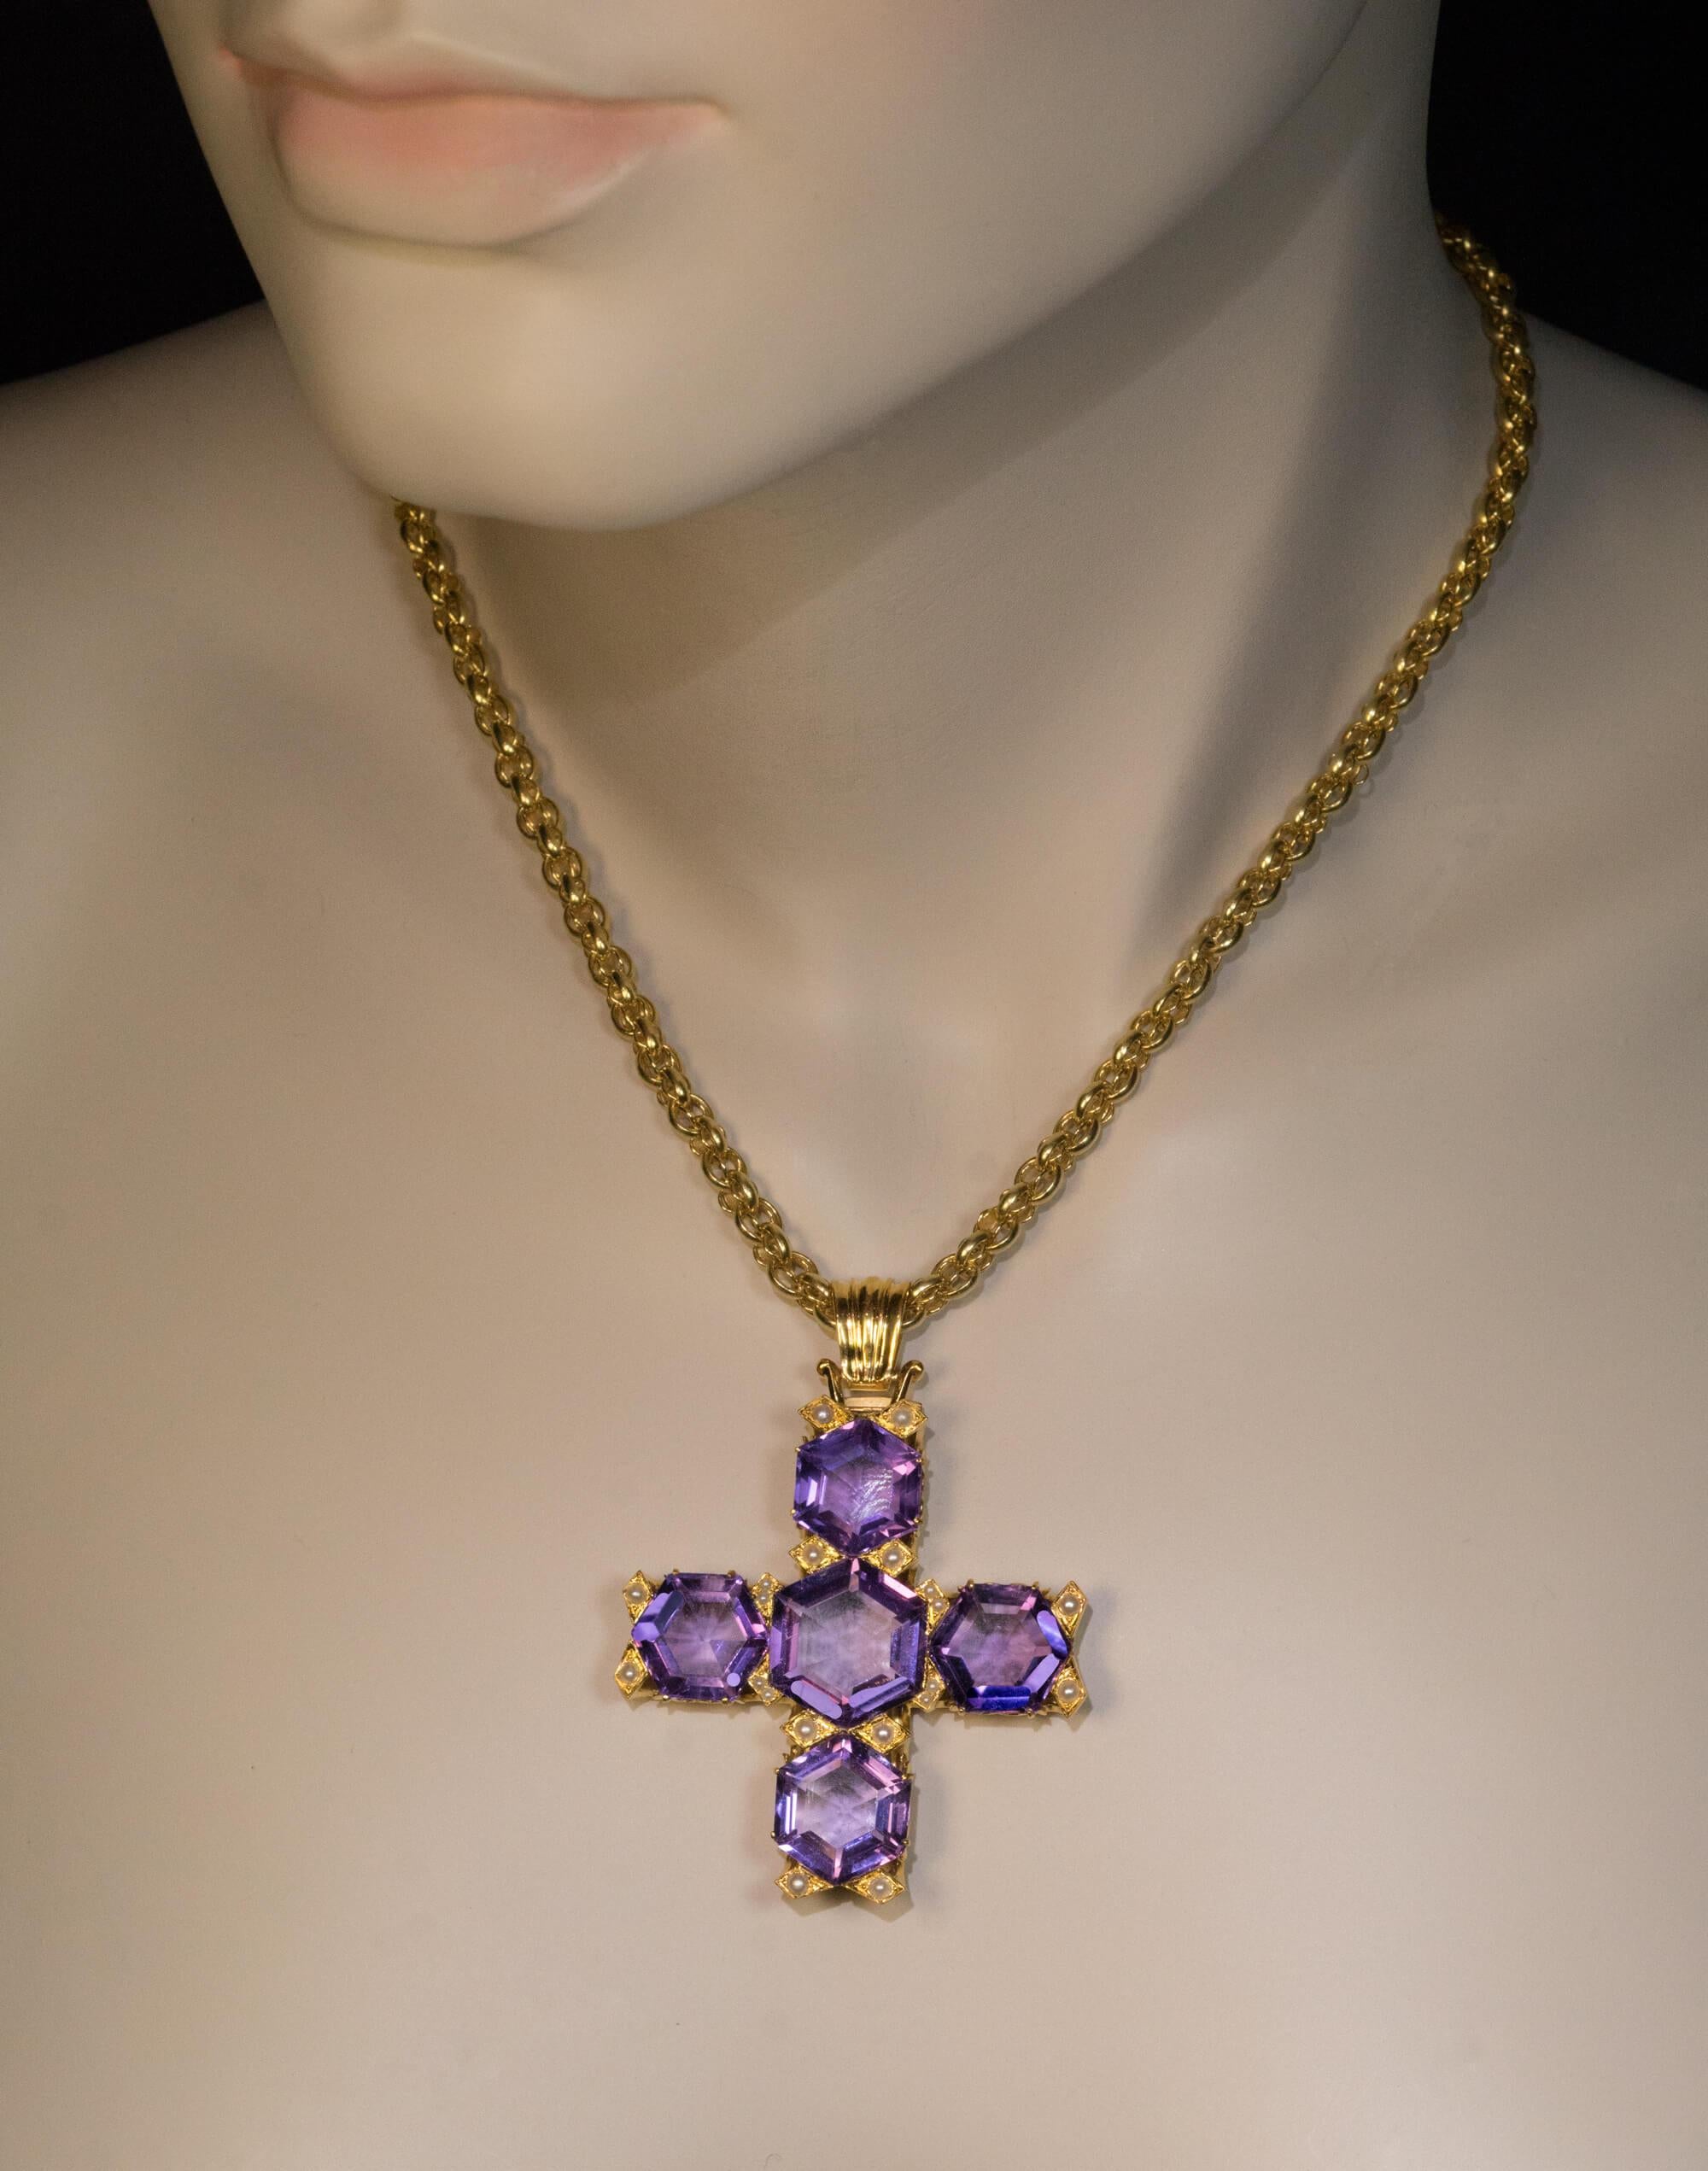 Circa 1890  This unusual late Victorian era large 18K gold cross pendant is embellished with five step cut hexagon shape amethysts of light to medium purple color. The amethysts are accented by seed pearls.  The cross measures (without bail) 48 x 46